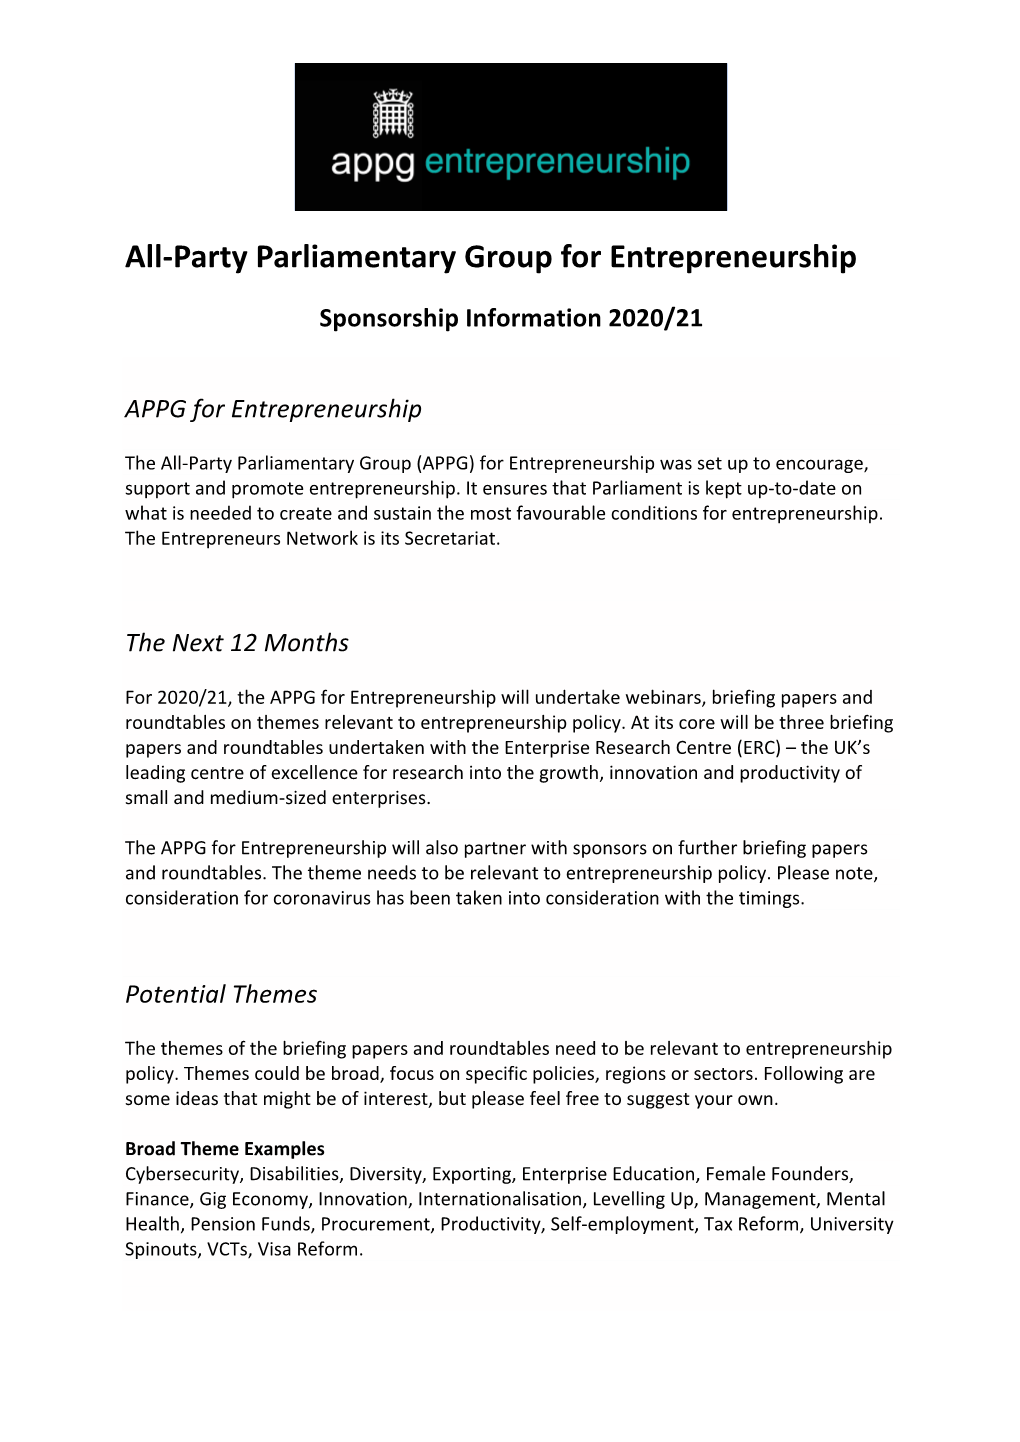 All-Party Parliamentary Group for Entrepreneurship